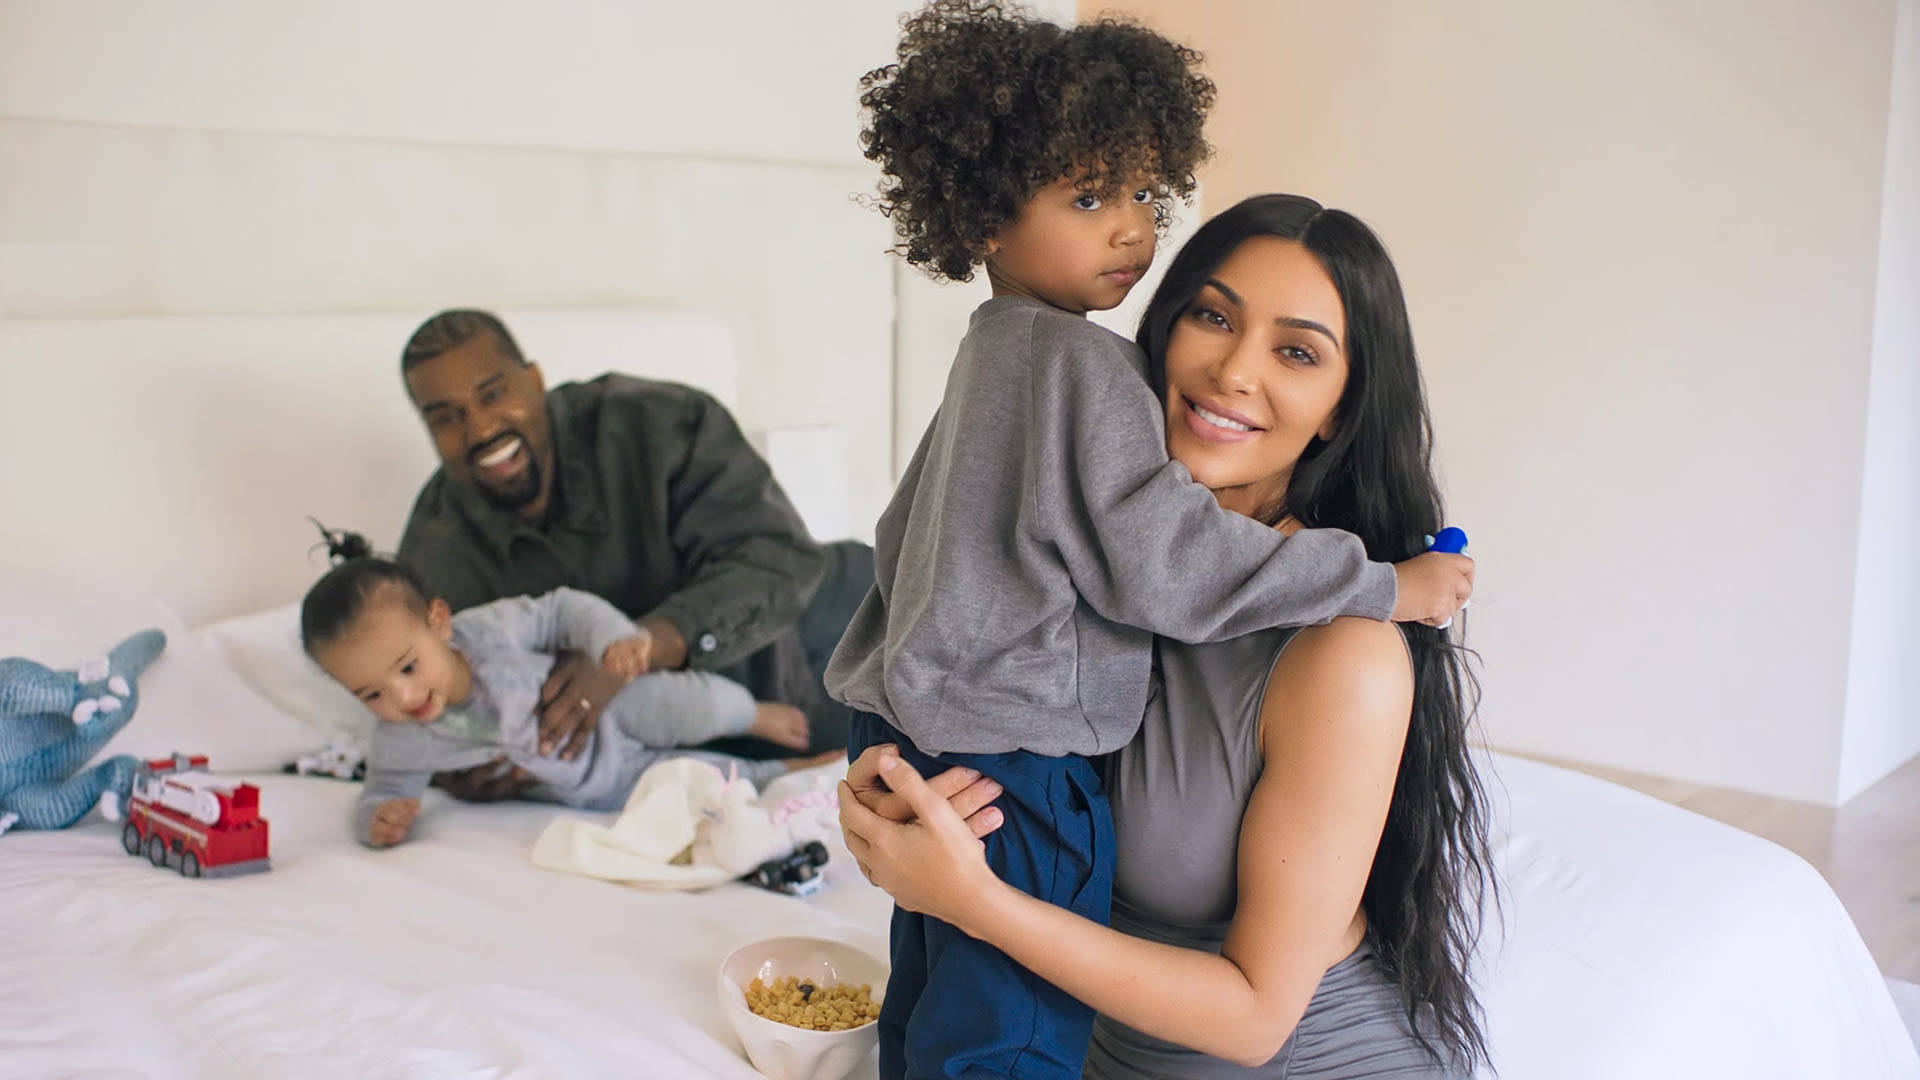 Kim Kardashian, Surrounded By Her Family Background